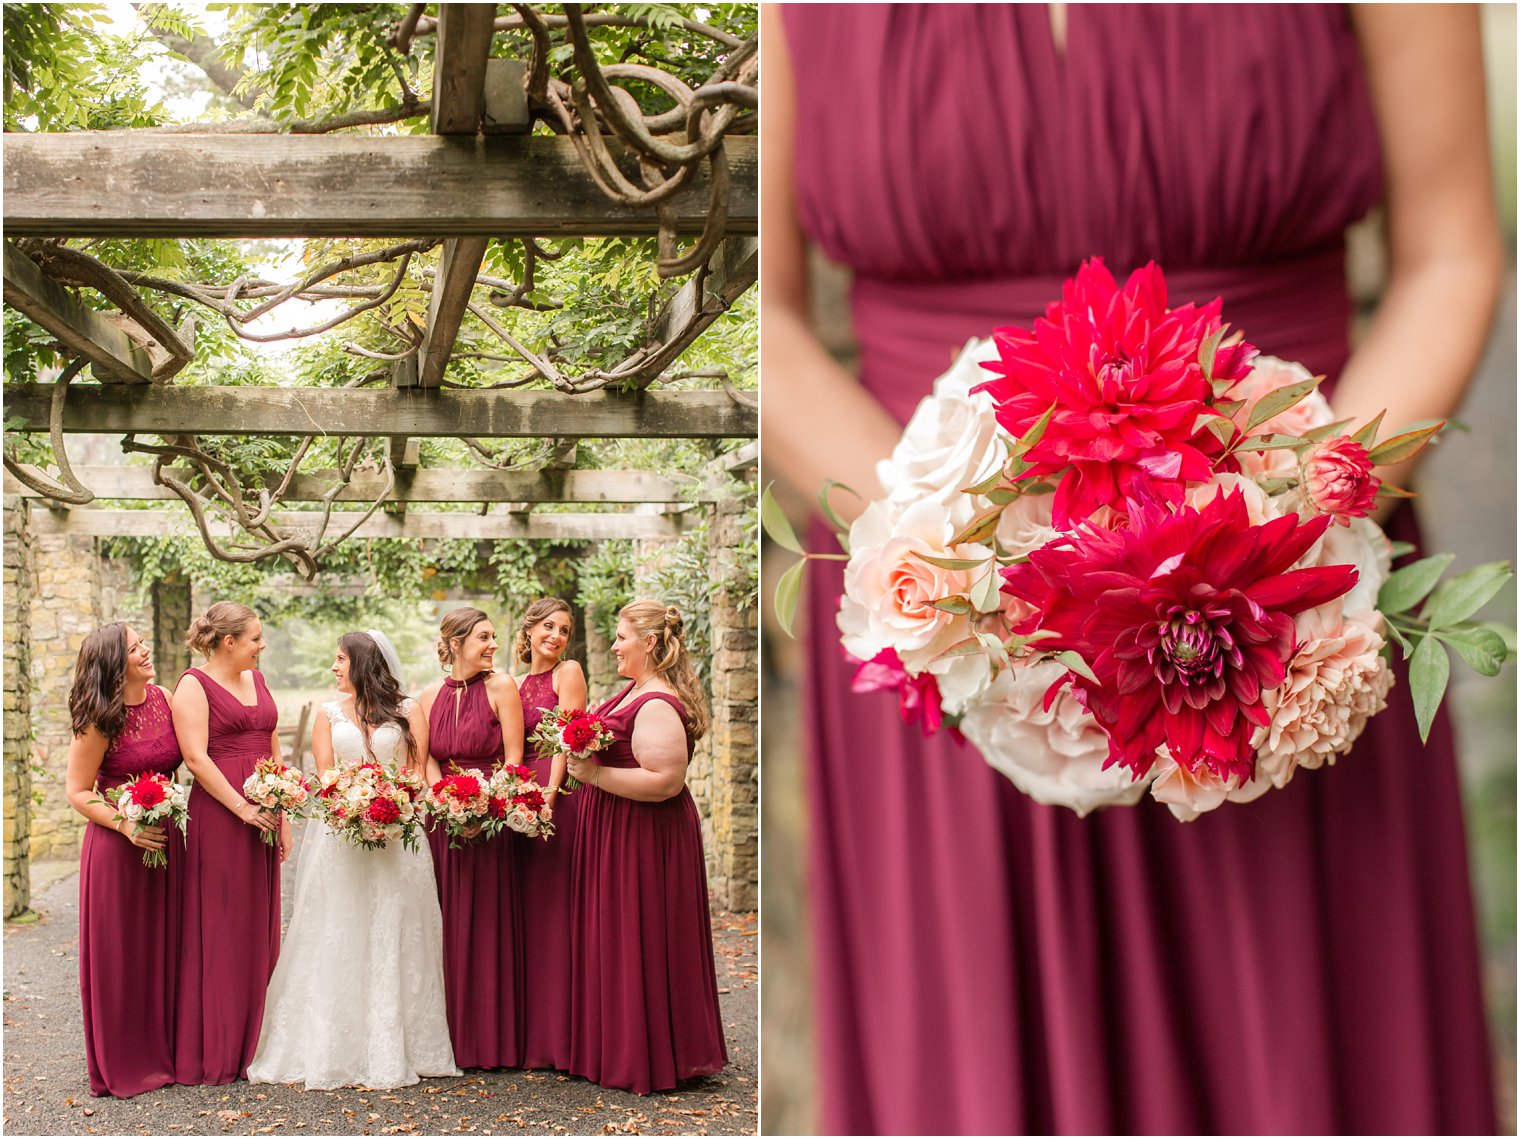 red and white wedding florals by Blue Jasmine Design at Olde Mill Inn photographed by Idalia Photography